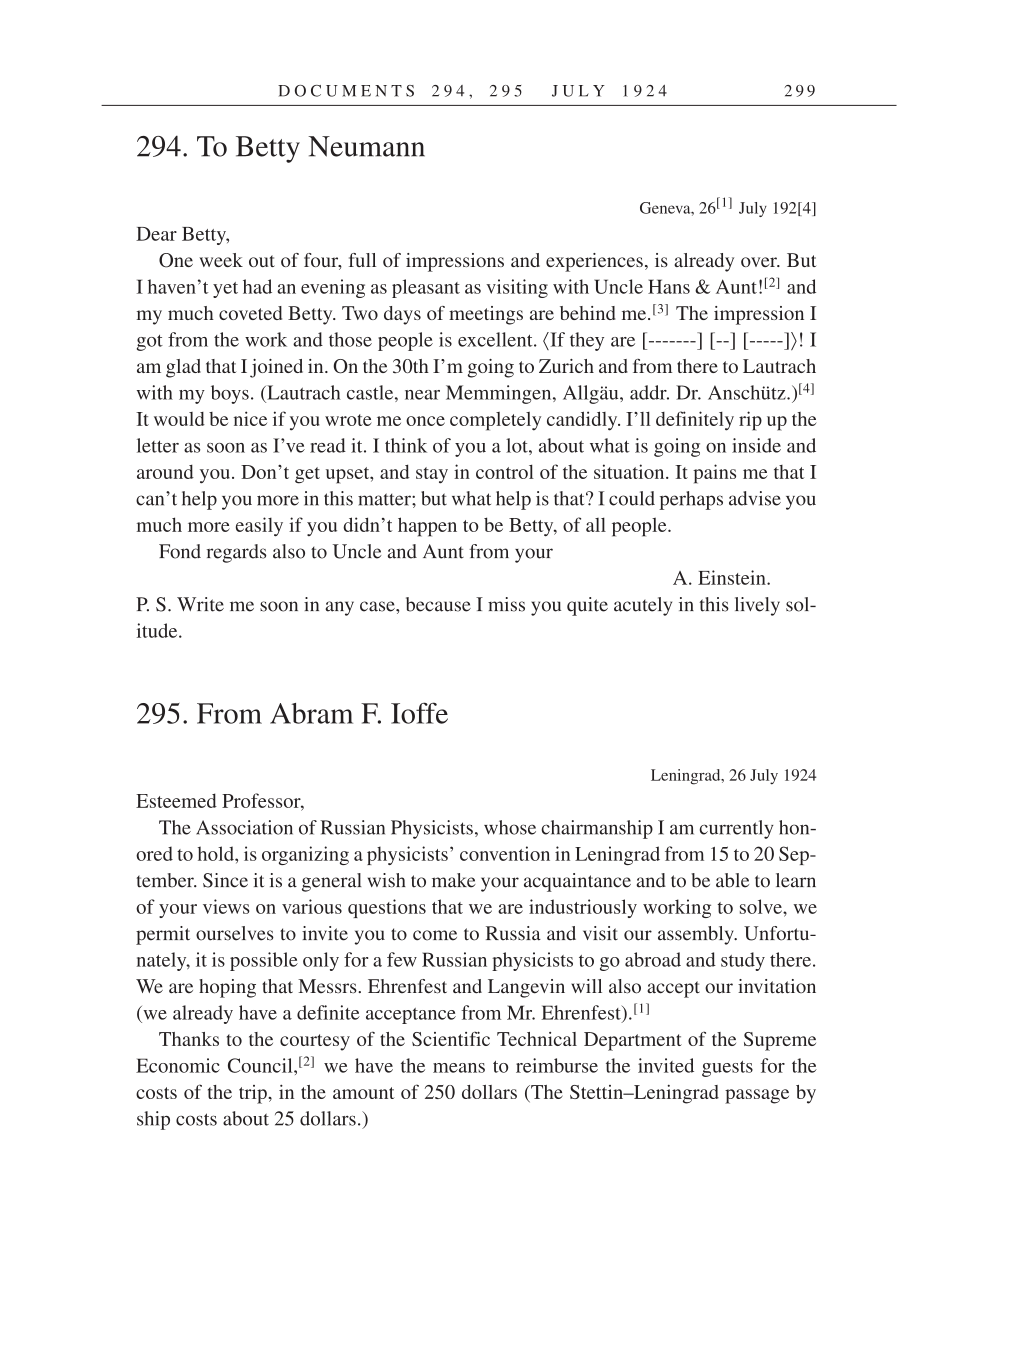 Volume 14: The Berlin Years: Writings & Correspondence, April 1923-May 1925 (English Translation Supplement) page 299